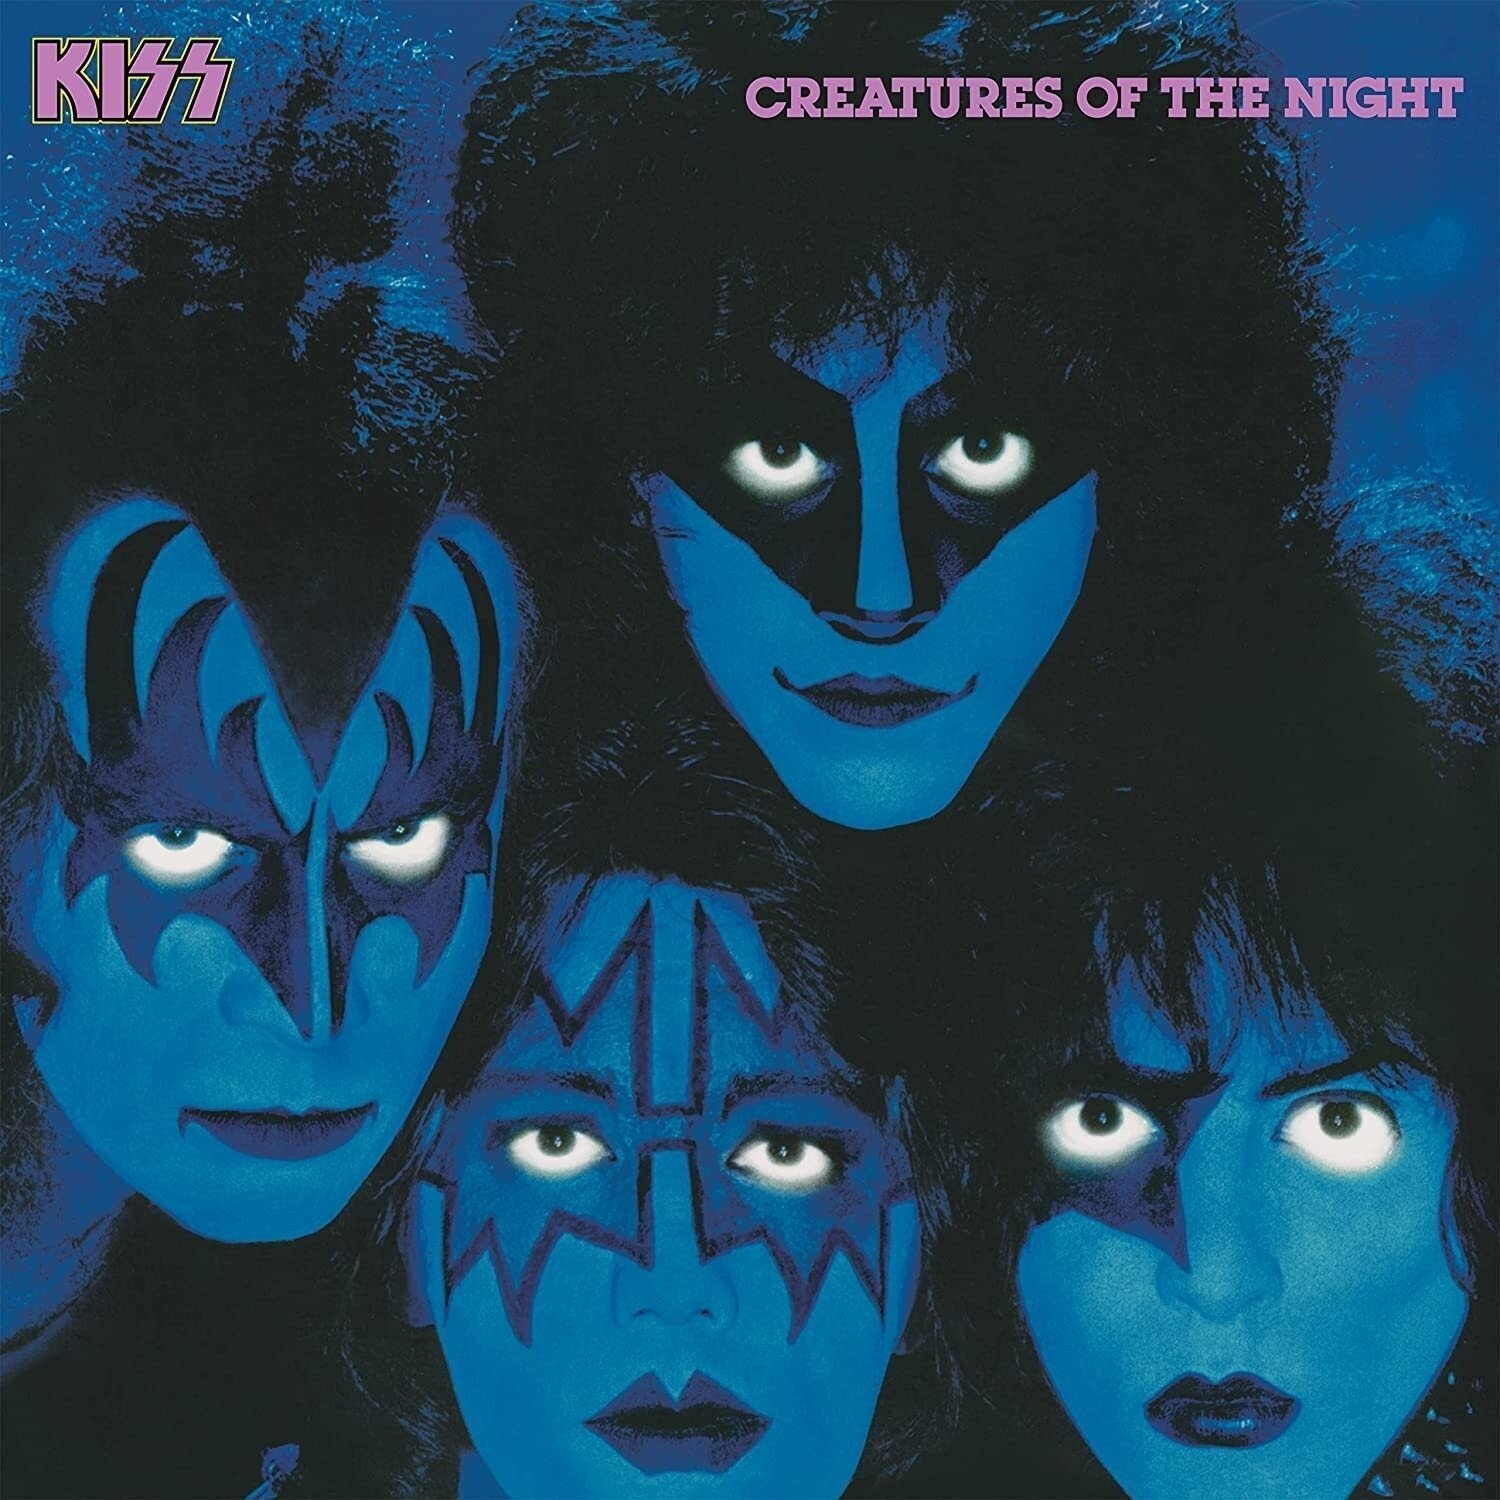 CD de música Kiss - Creatures Of The Night (Remastered) (Reissue) (CD)